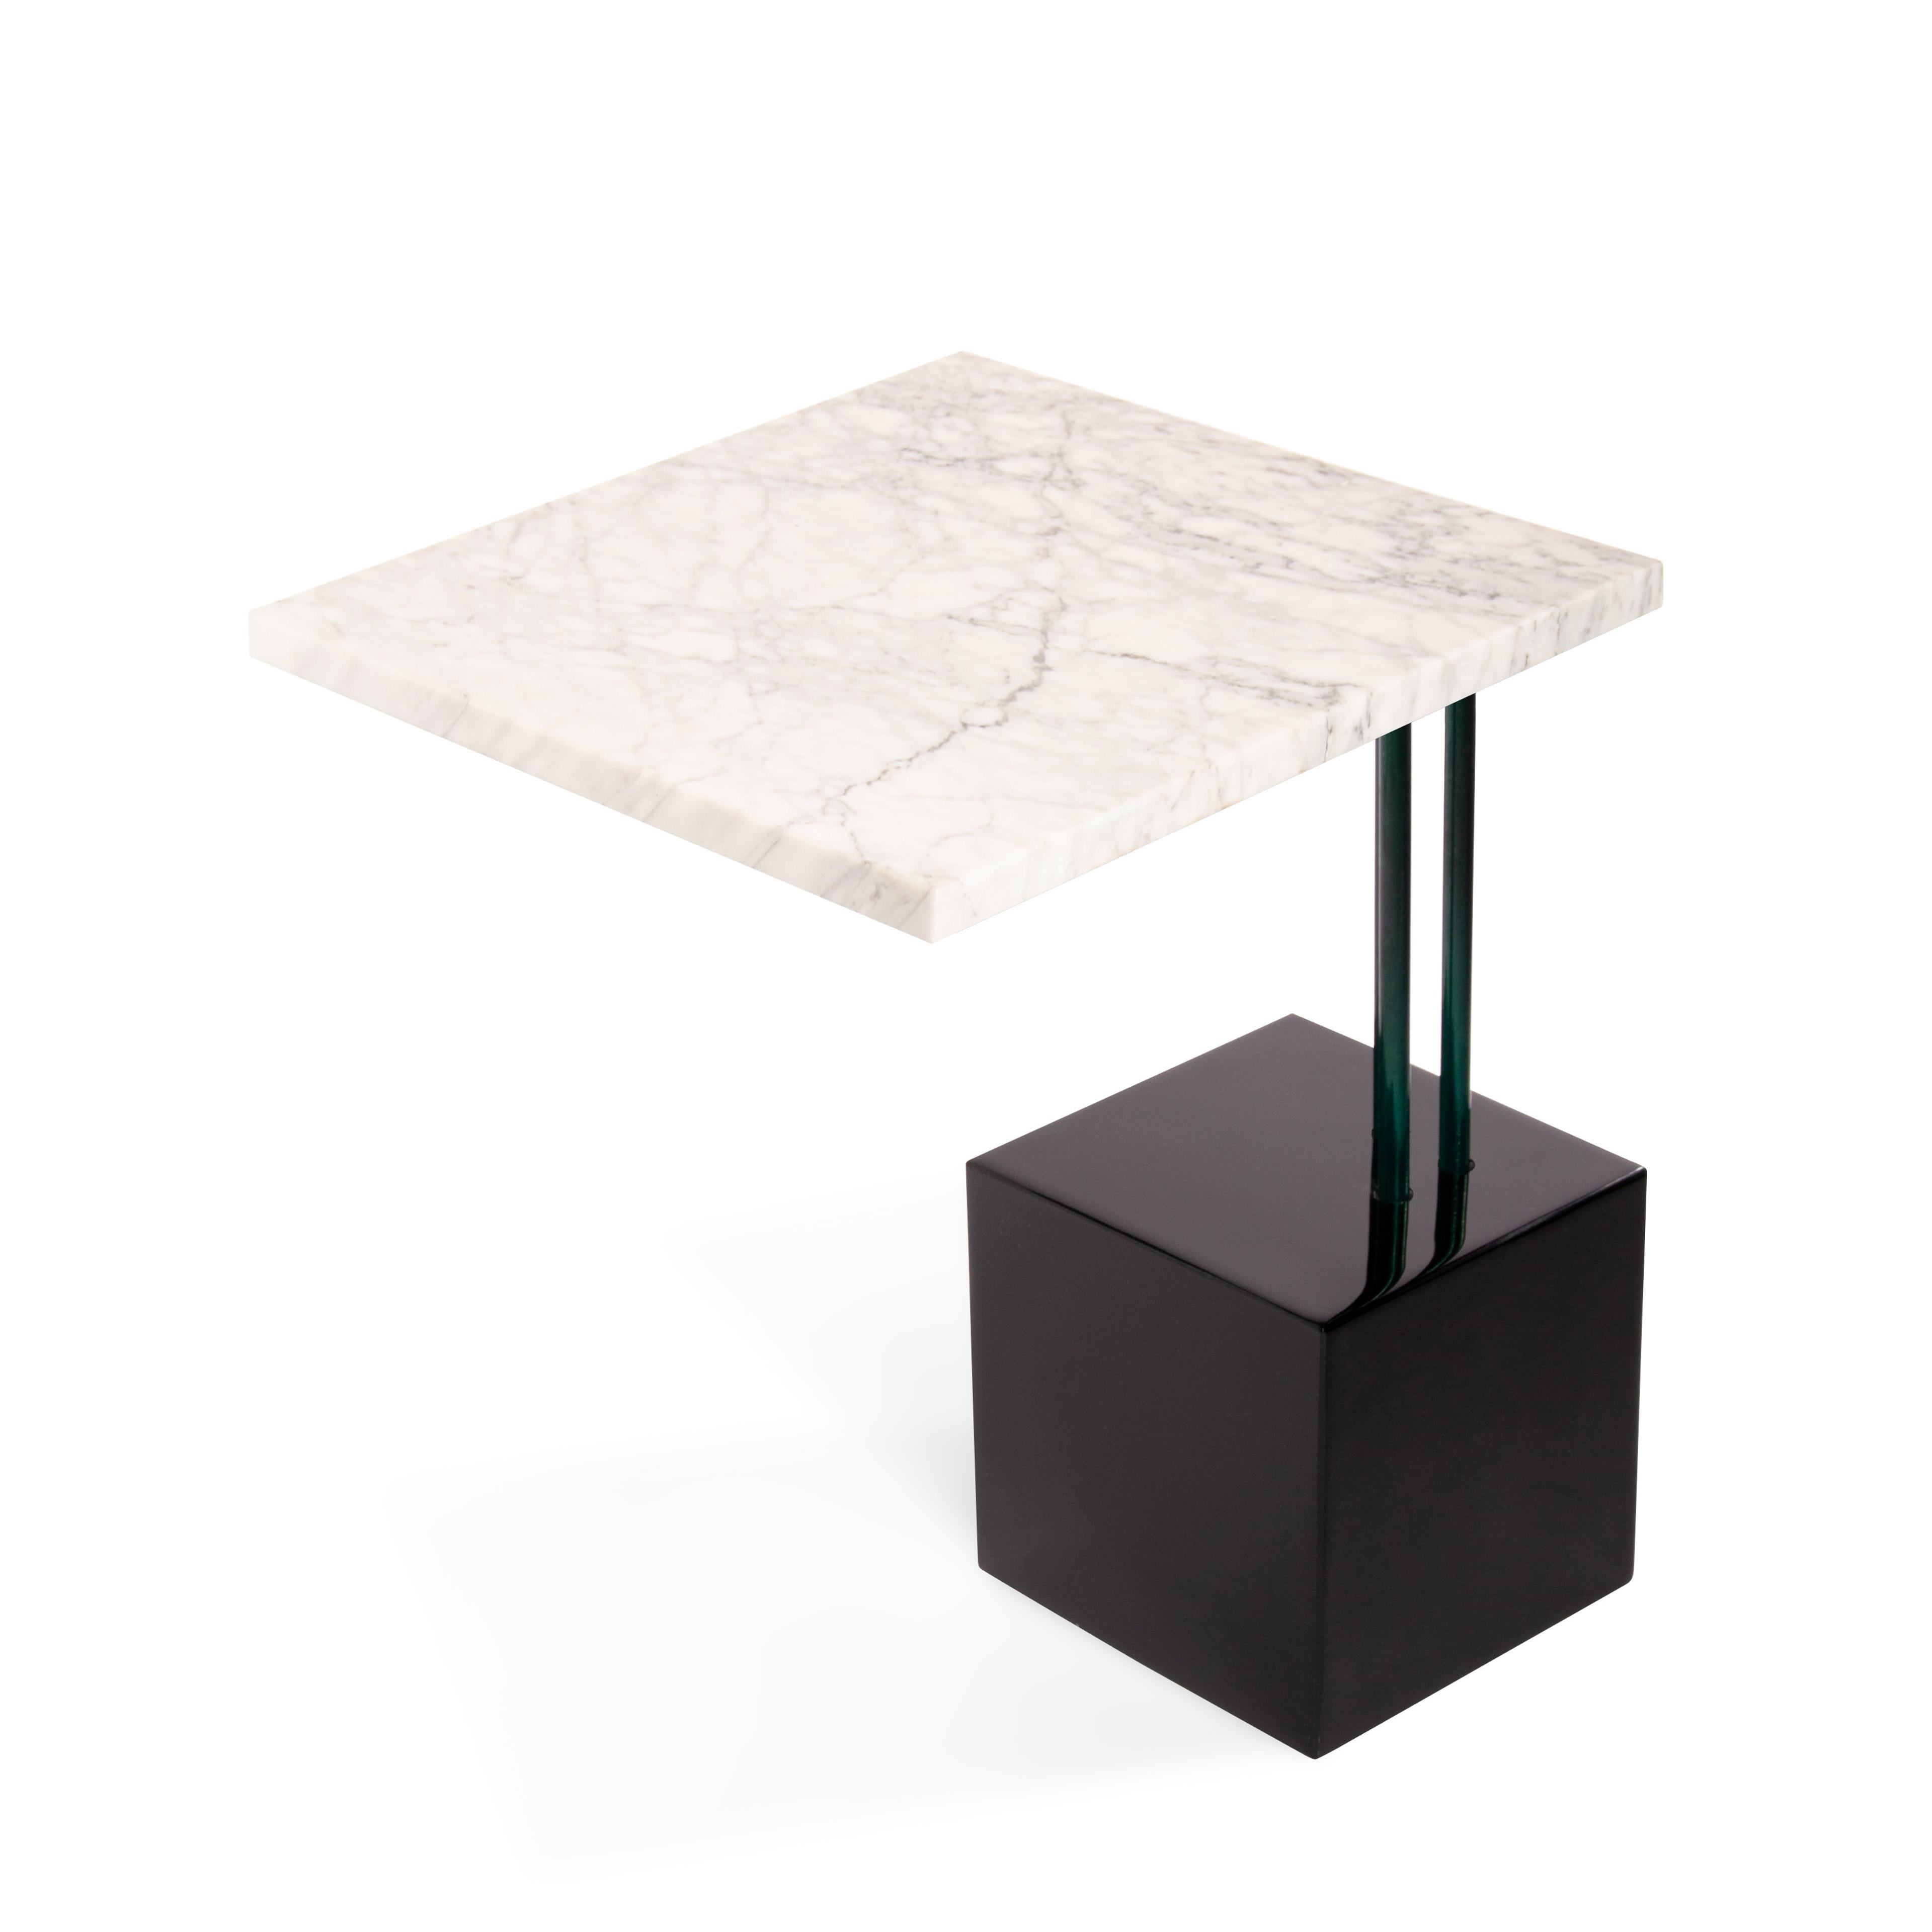 Organic Modern Configurable Geometry III Side Table by Sten Studio, REP by Tuleste Factory For Sale